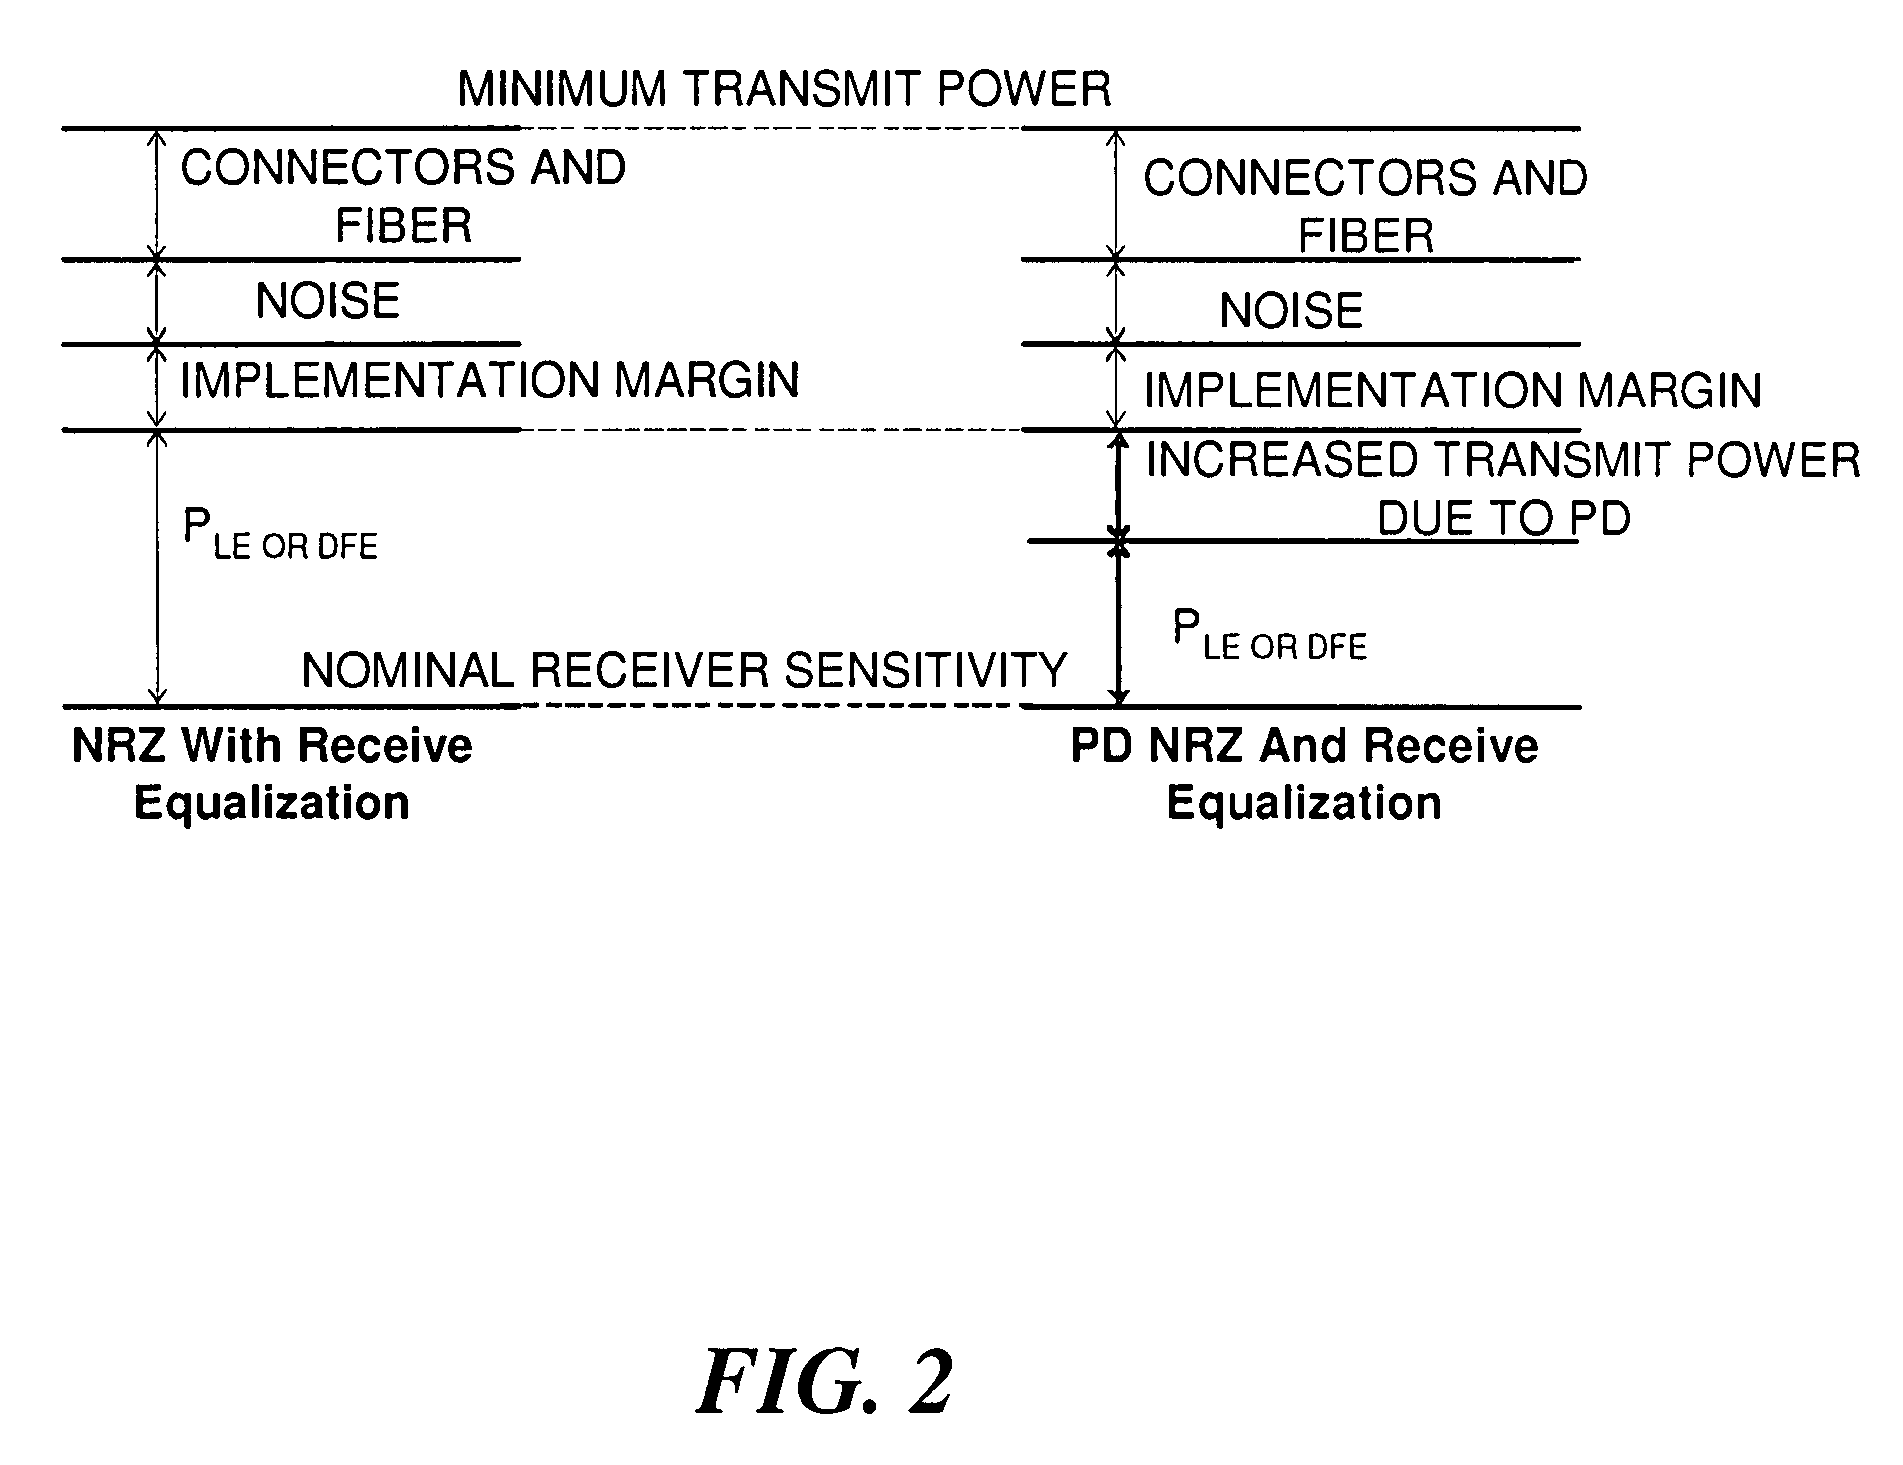 Fiber optic link, a transceiver for use in the link, and methods for designing and constructing fiber optic links and transceivers